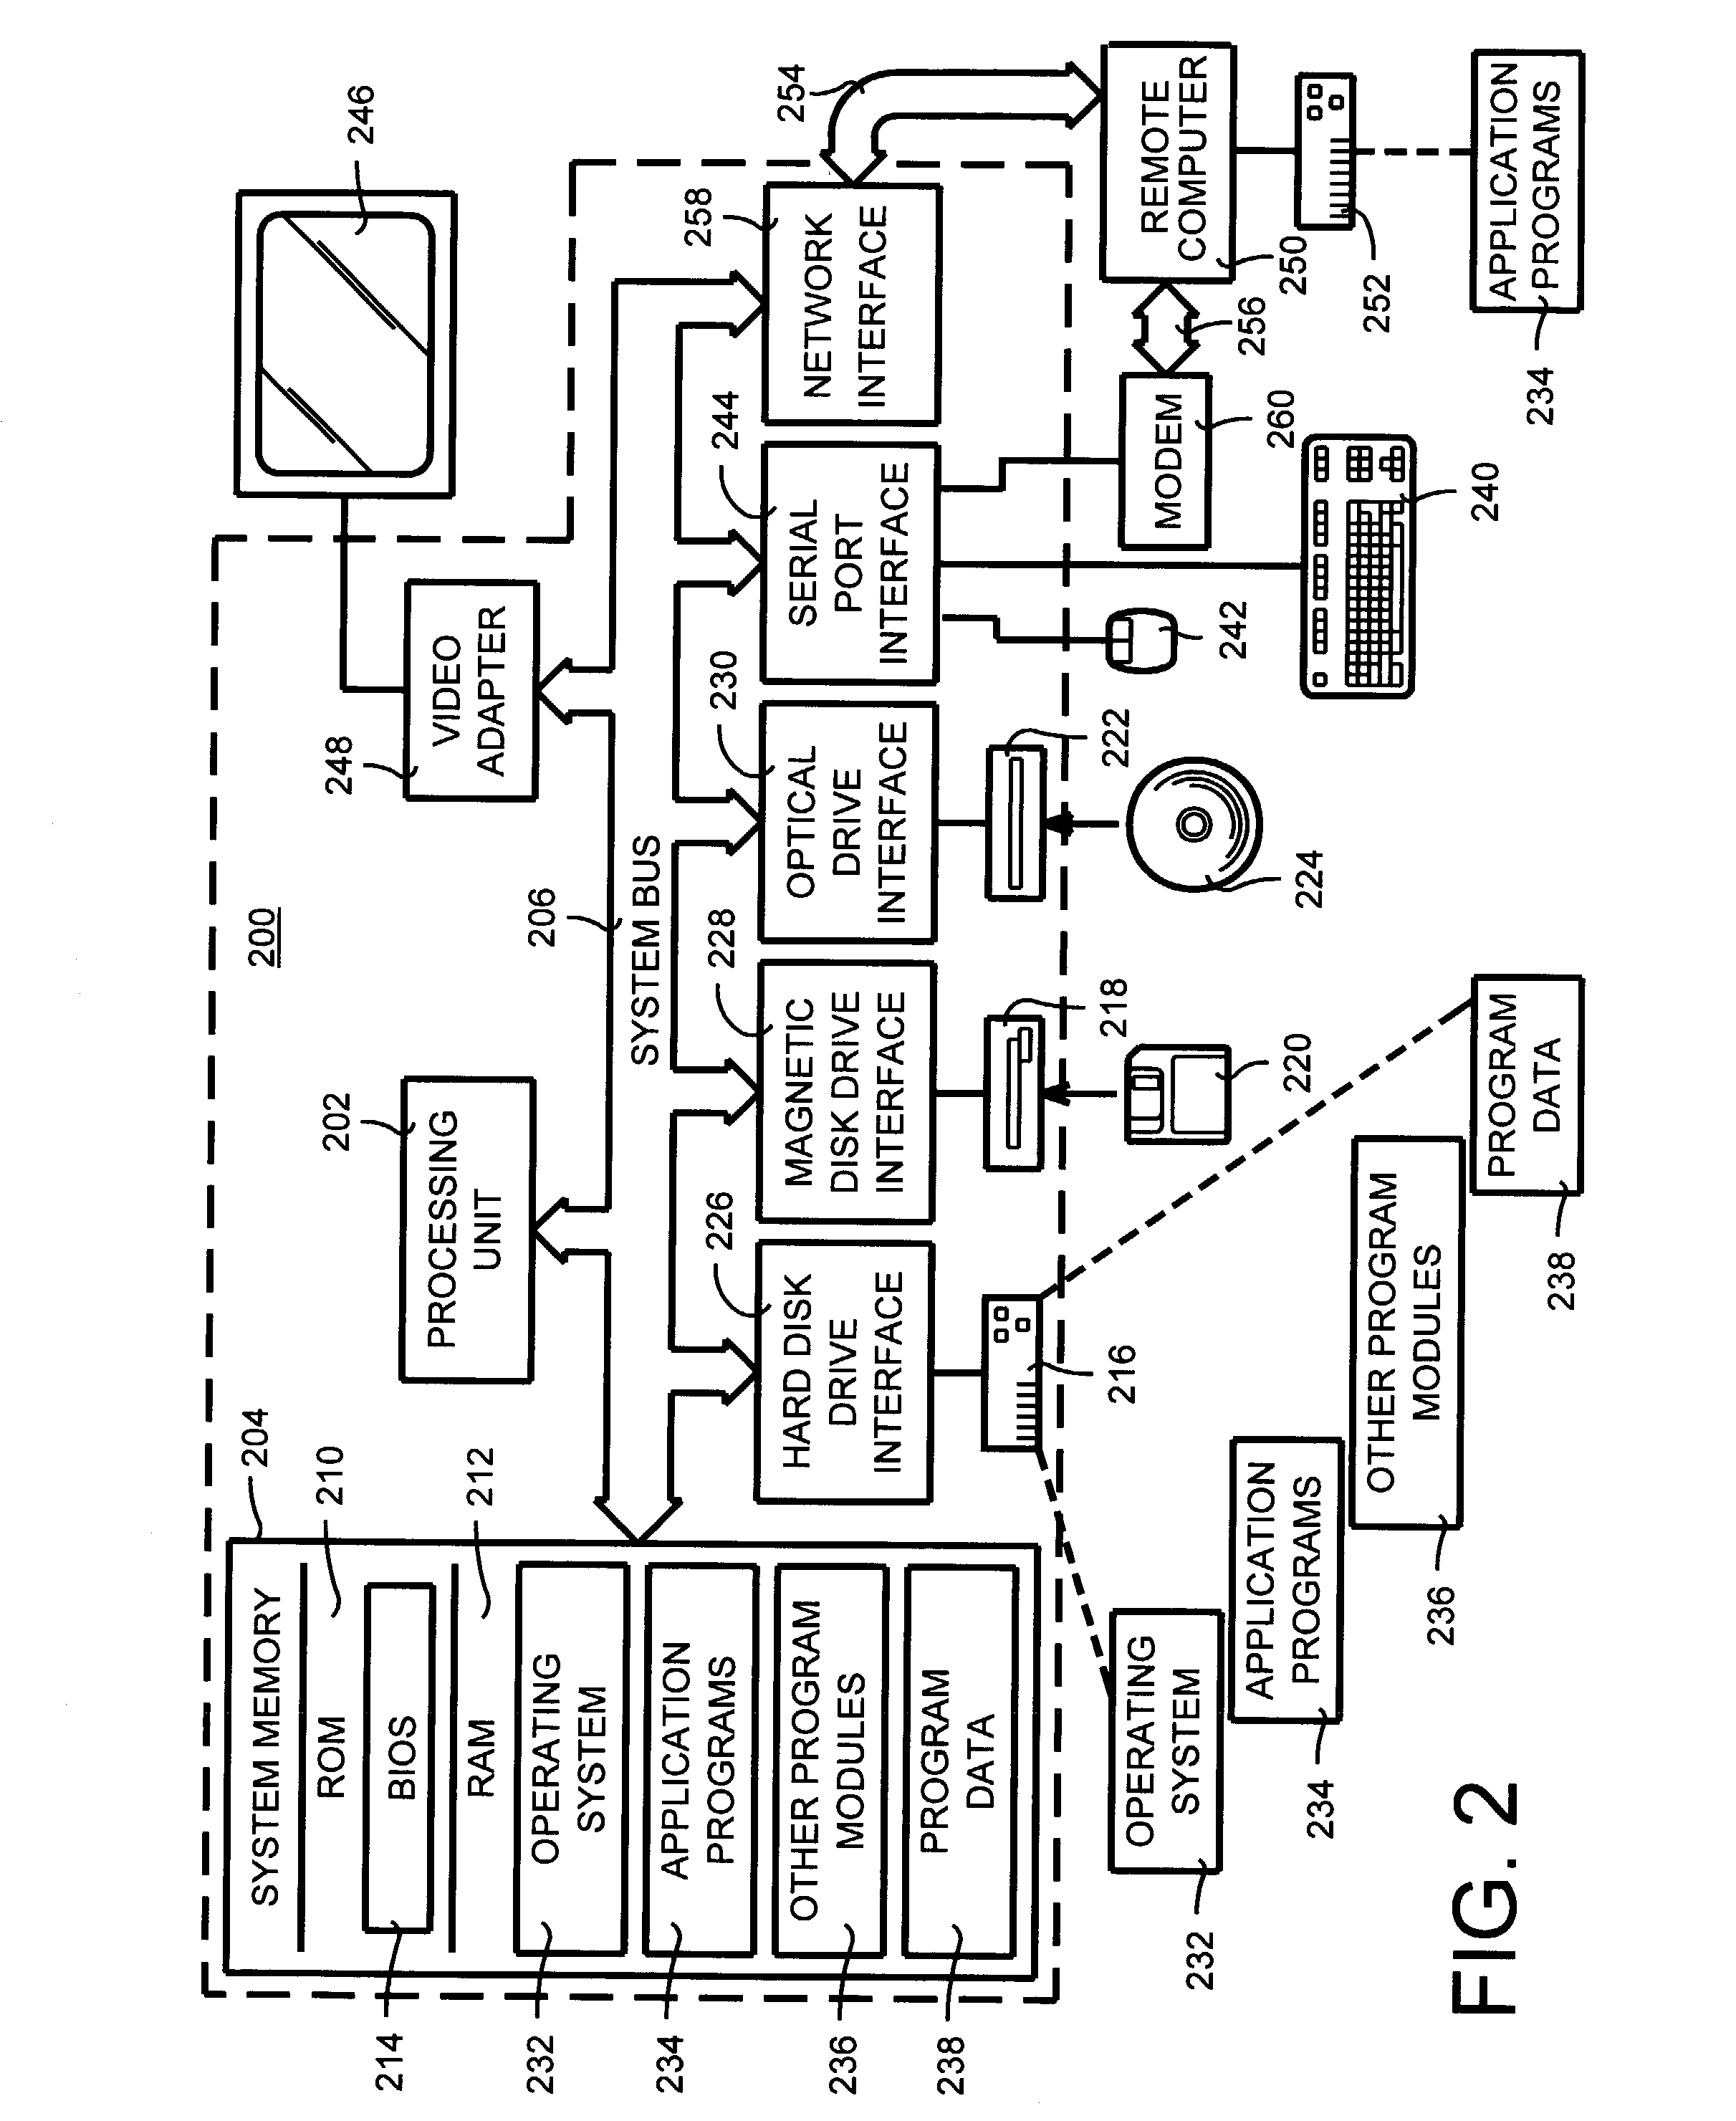 Automated camera management system and method for capturing presentations using videography rules